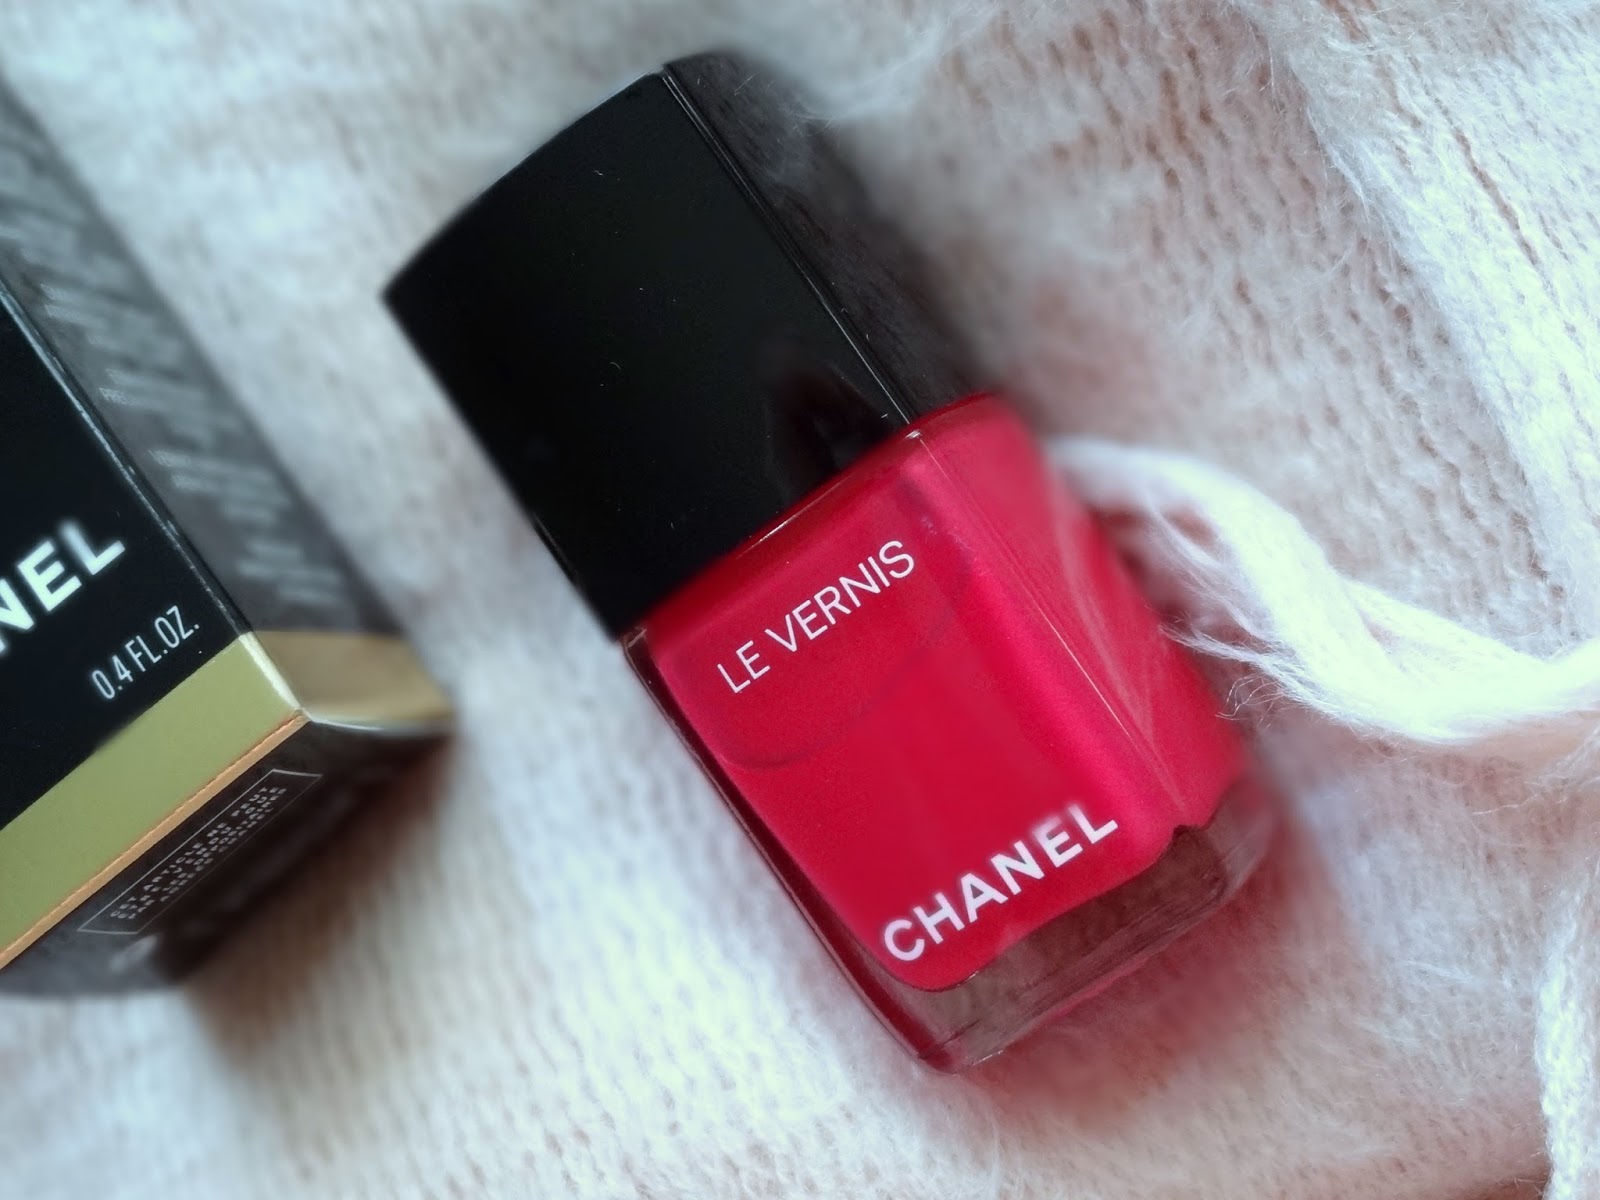 Makeup, Beauty and More: Chanel Le Vernis Longwear Nail Color in Camelia